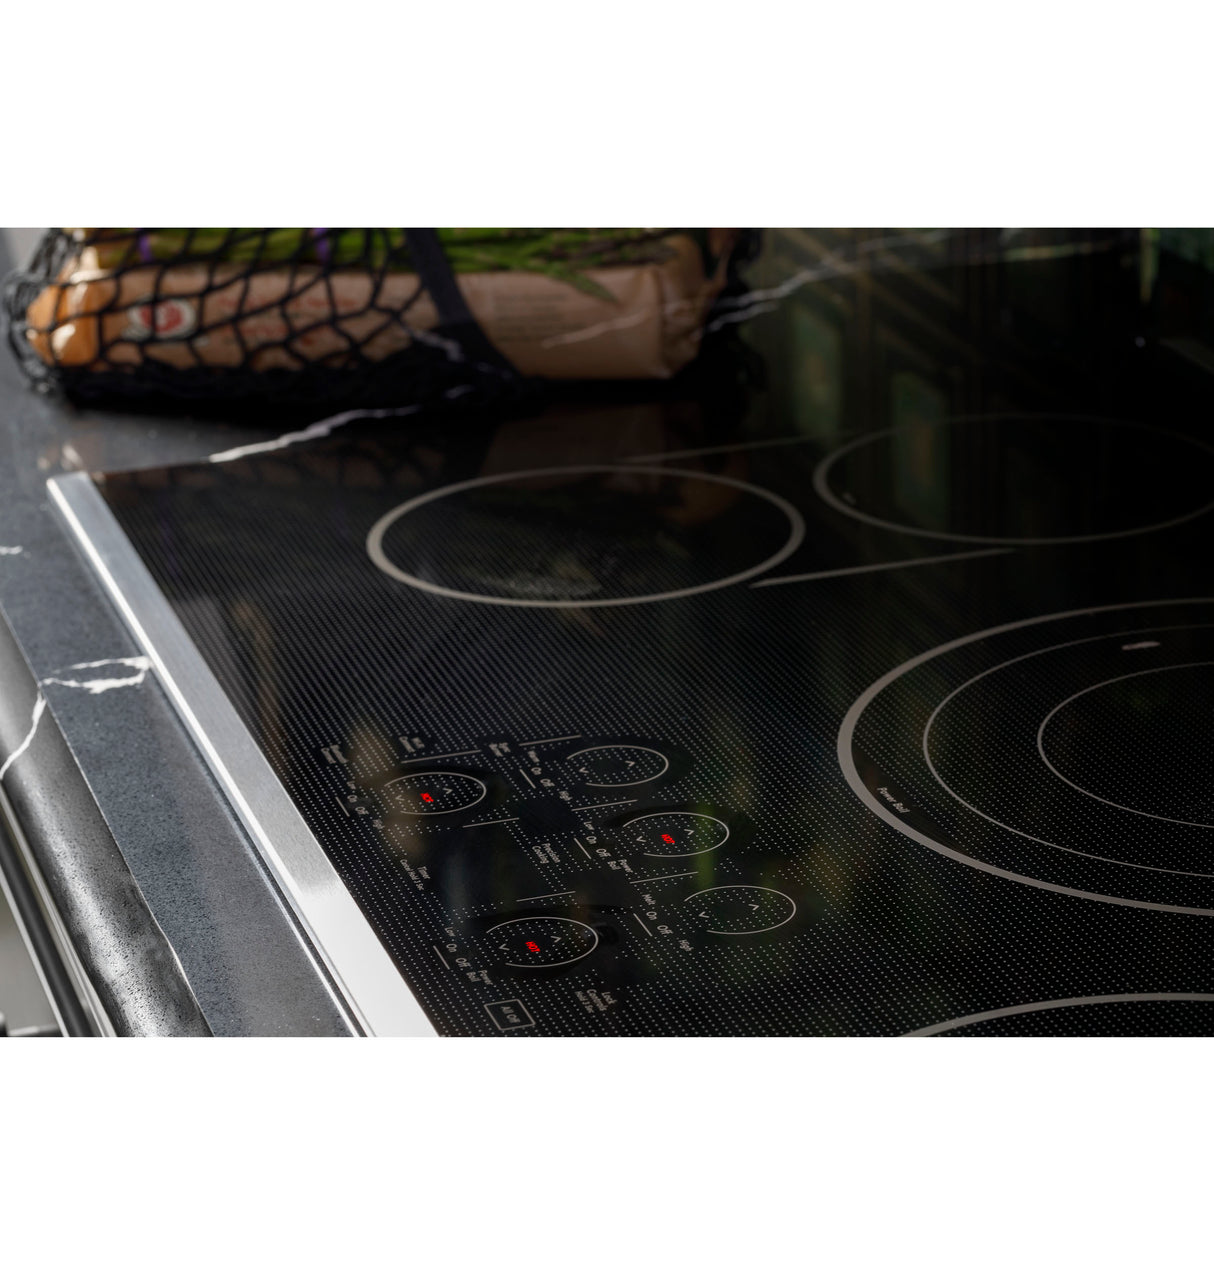 Caf(eback)(TM) 36" Touch-Control Electric Cooktop - (CEP90361TBB)